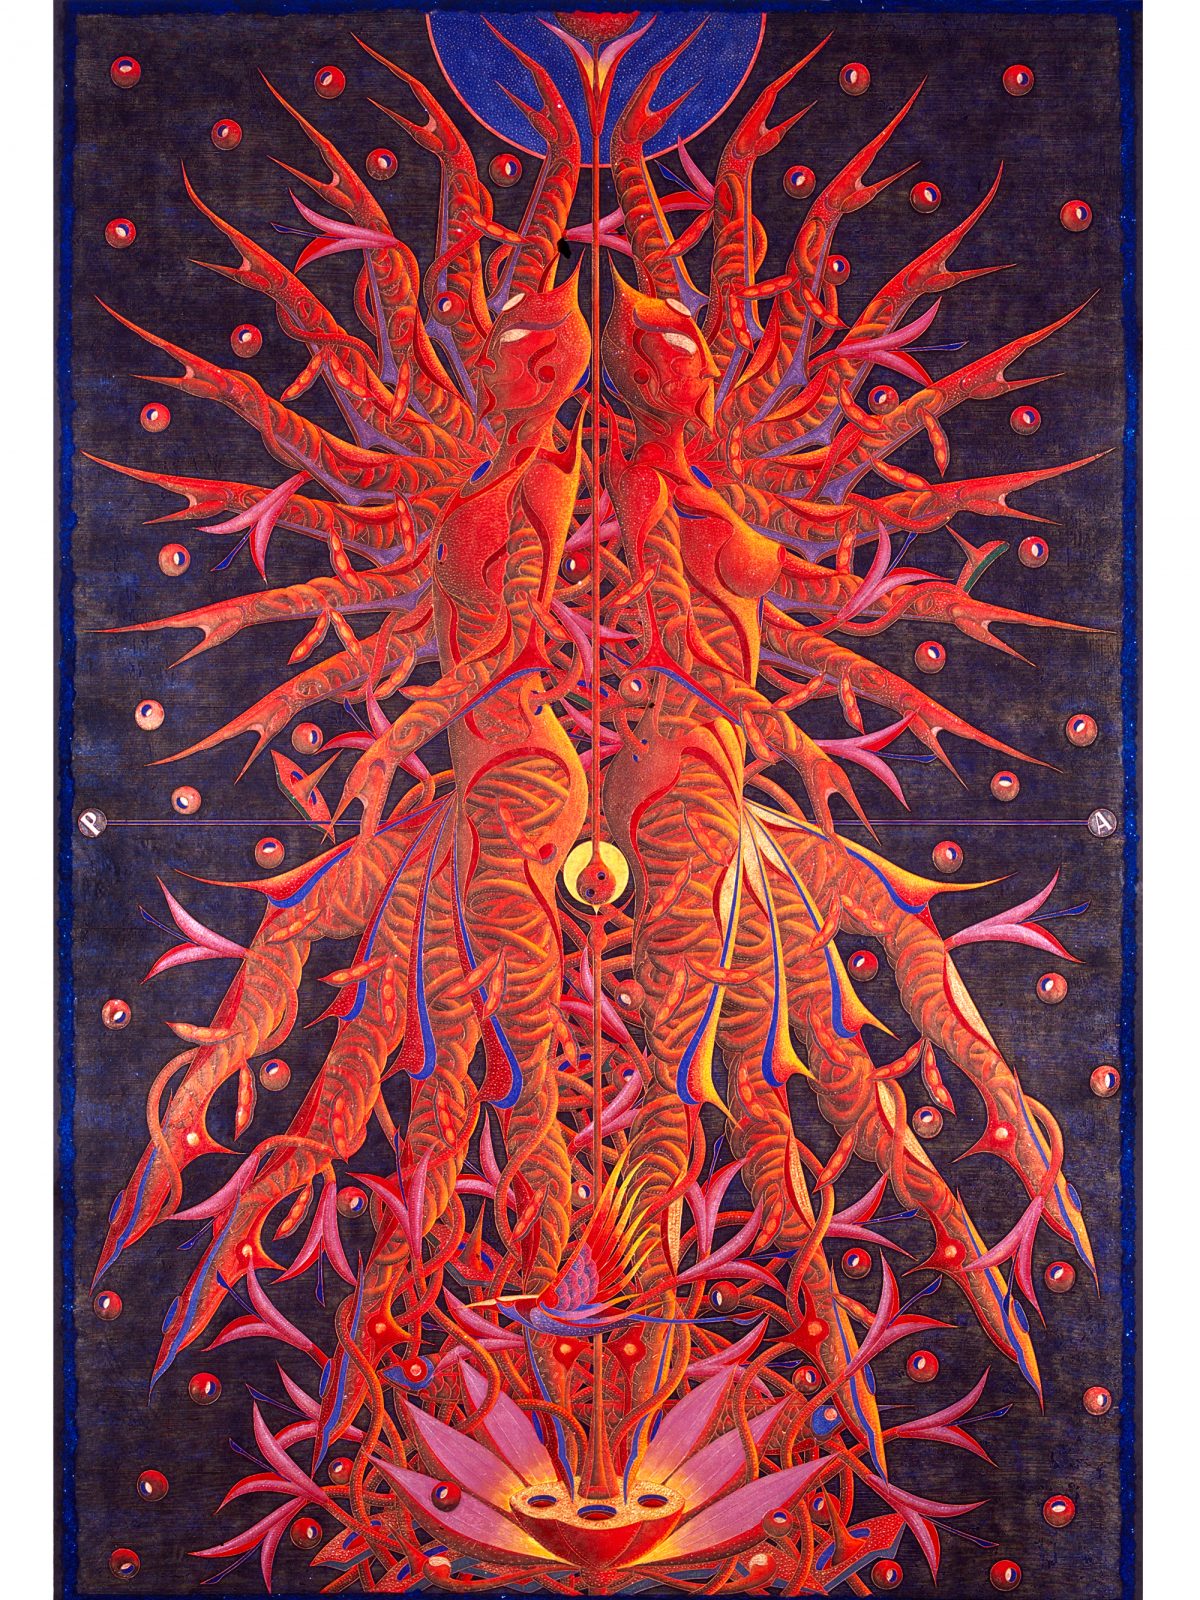 'Red-Life,Harmonious'-woodcut-with-acrylic-modelling-paster-and-minerals-on-paper,150x100cm,2005